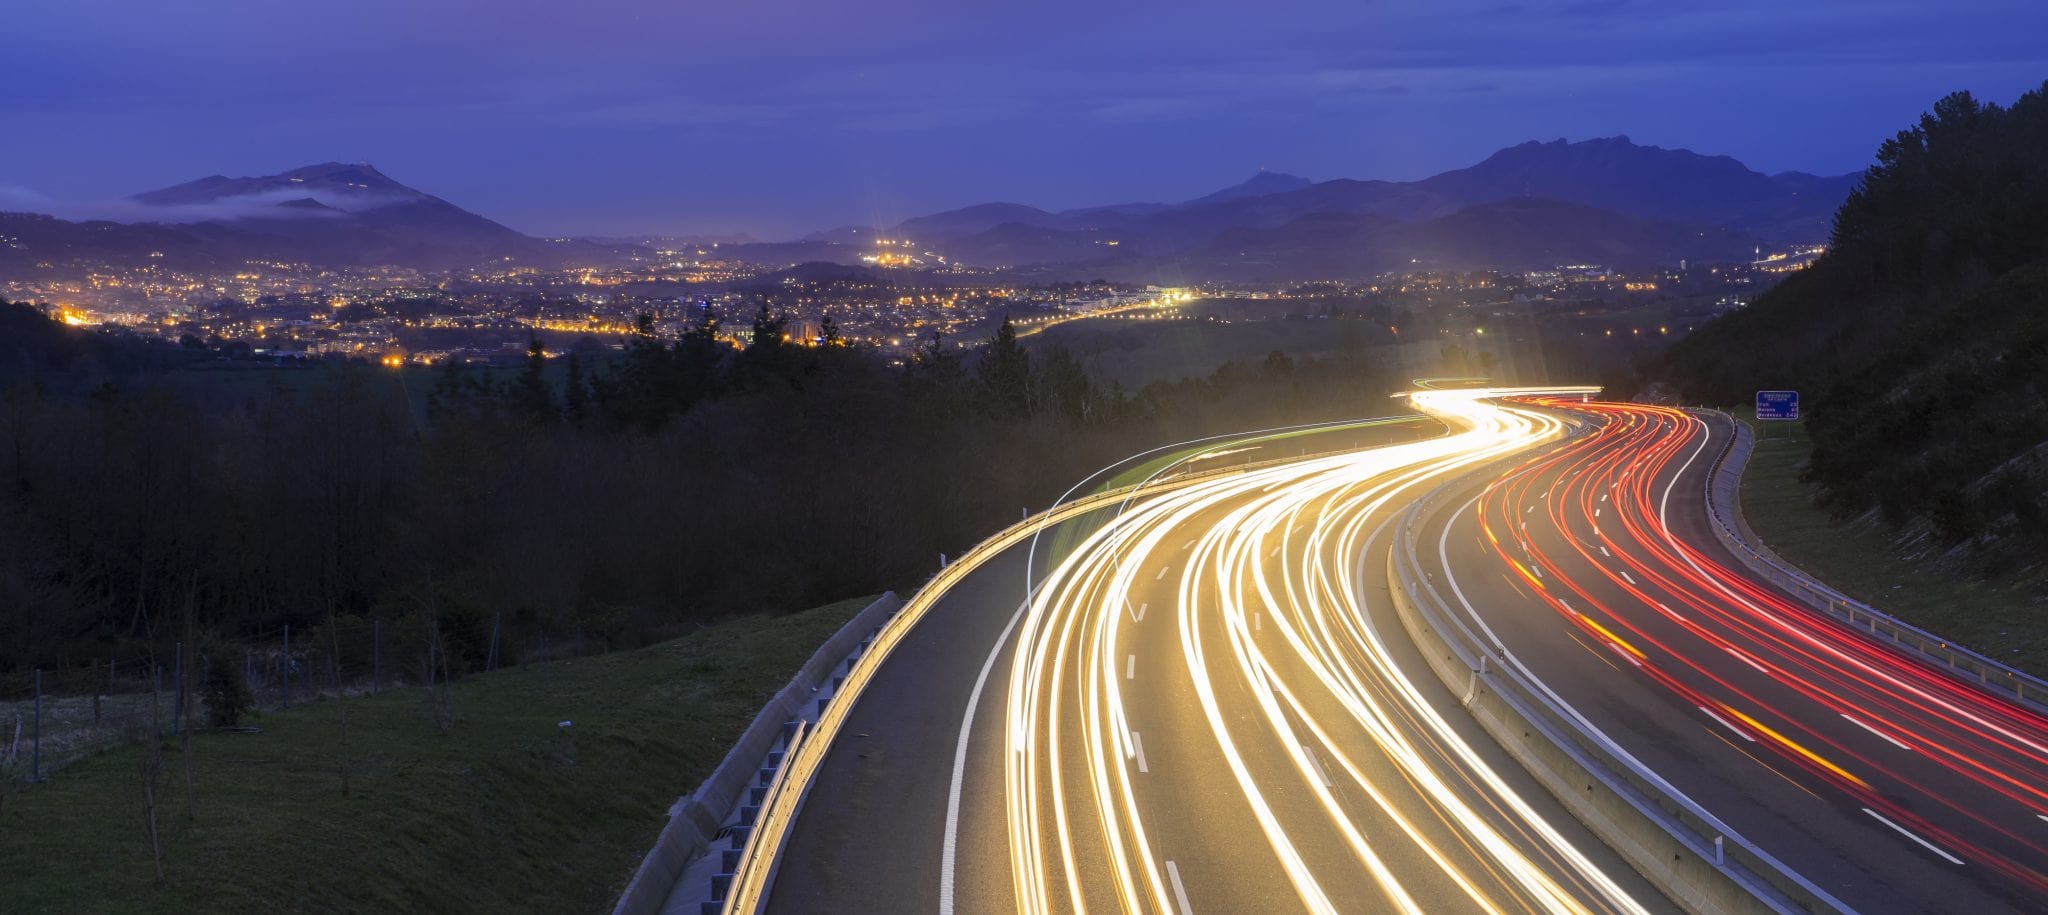 Highway at night with white and red blurred lines representing fast-moving cars with mountains in background